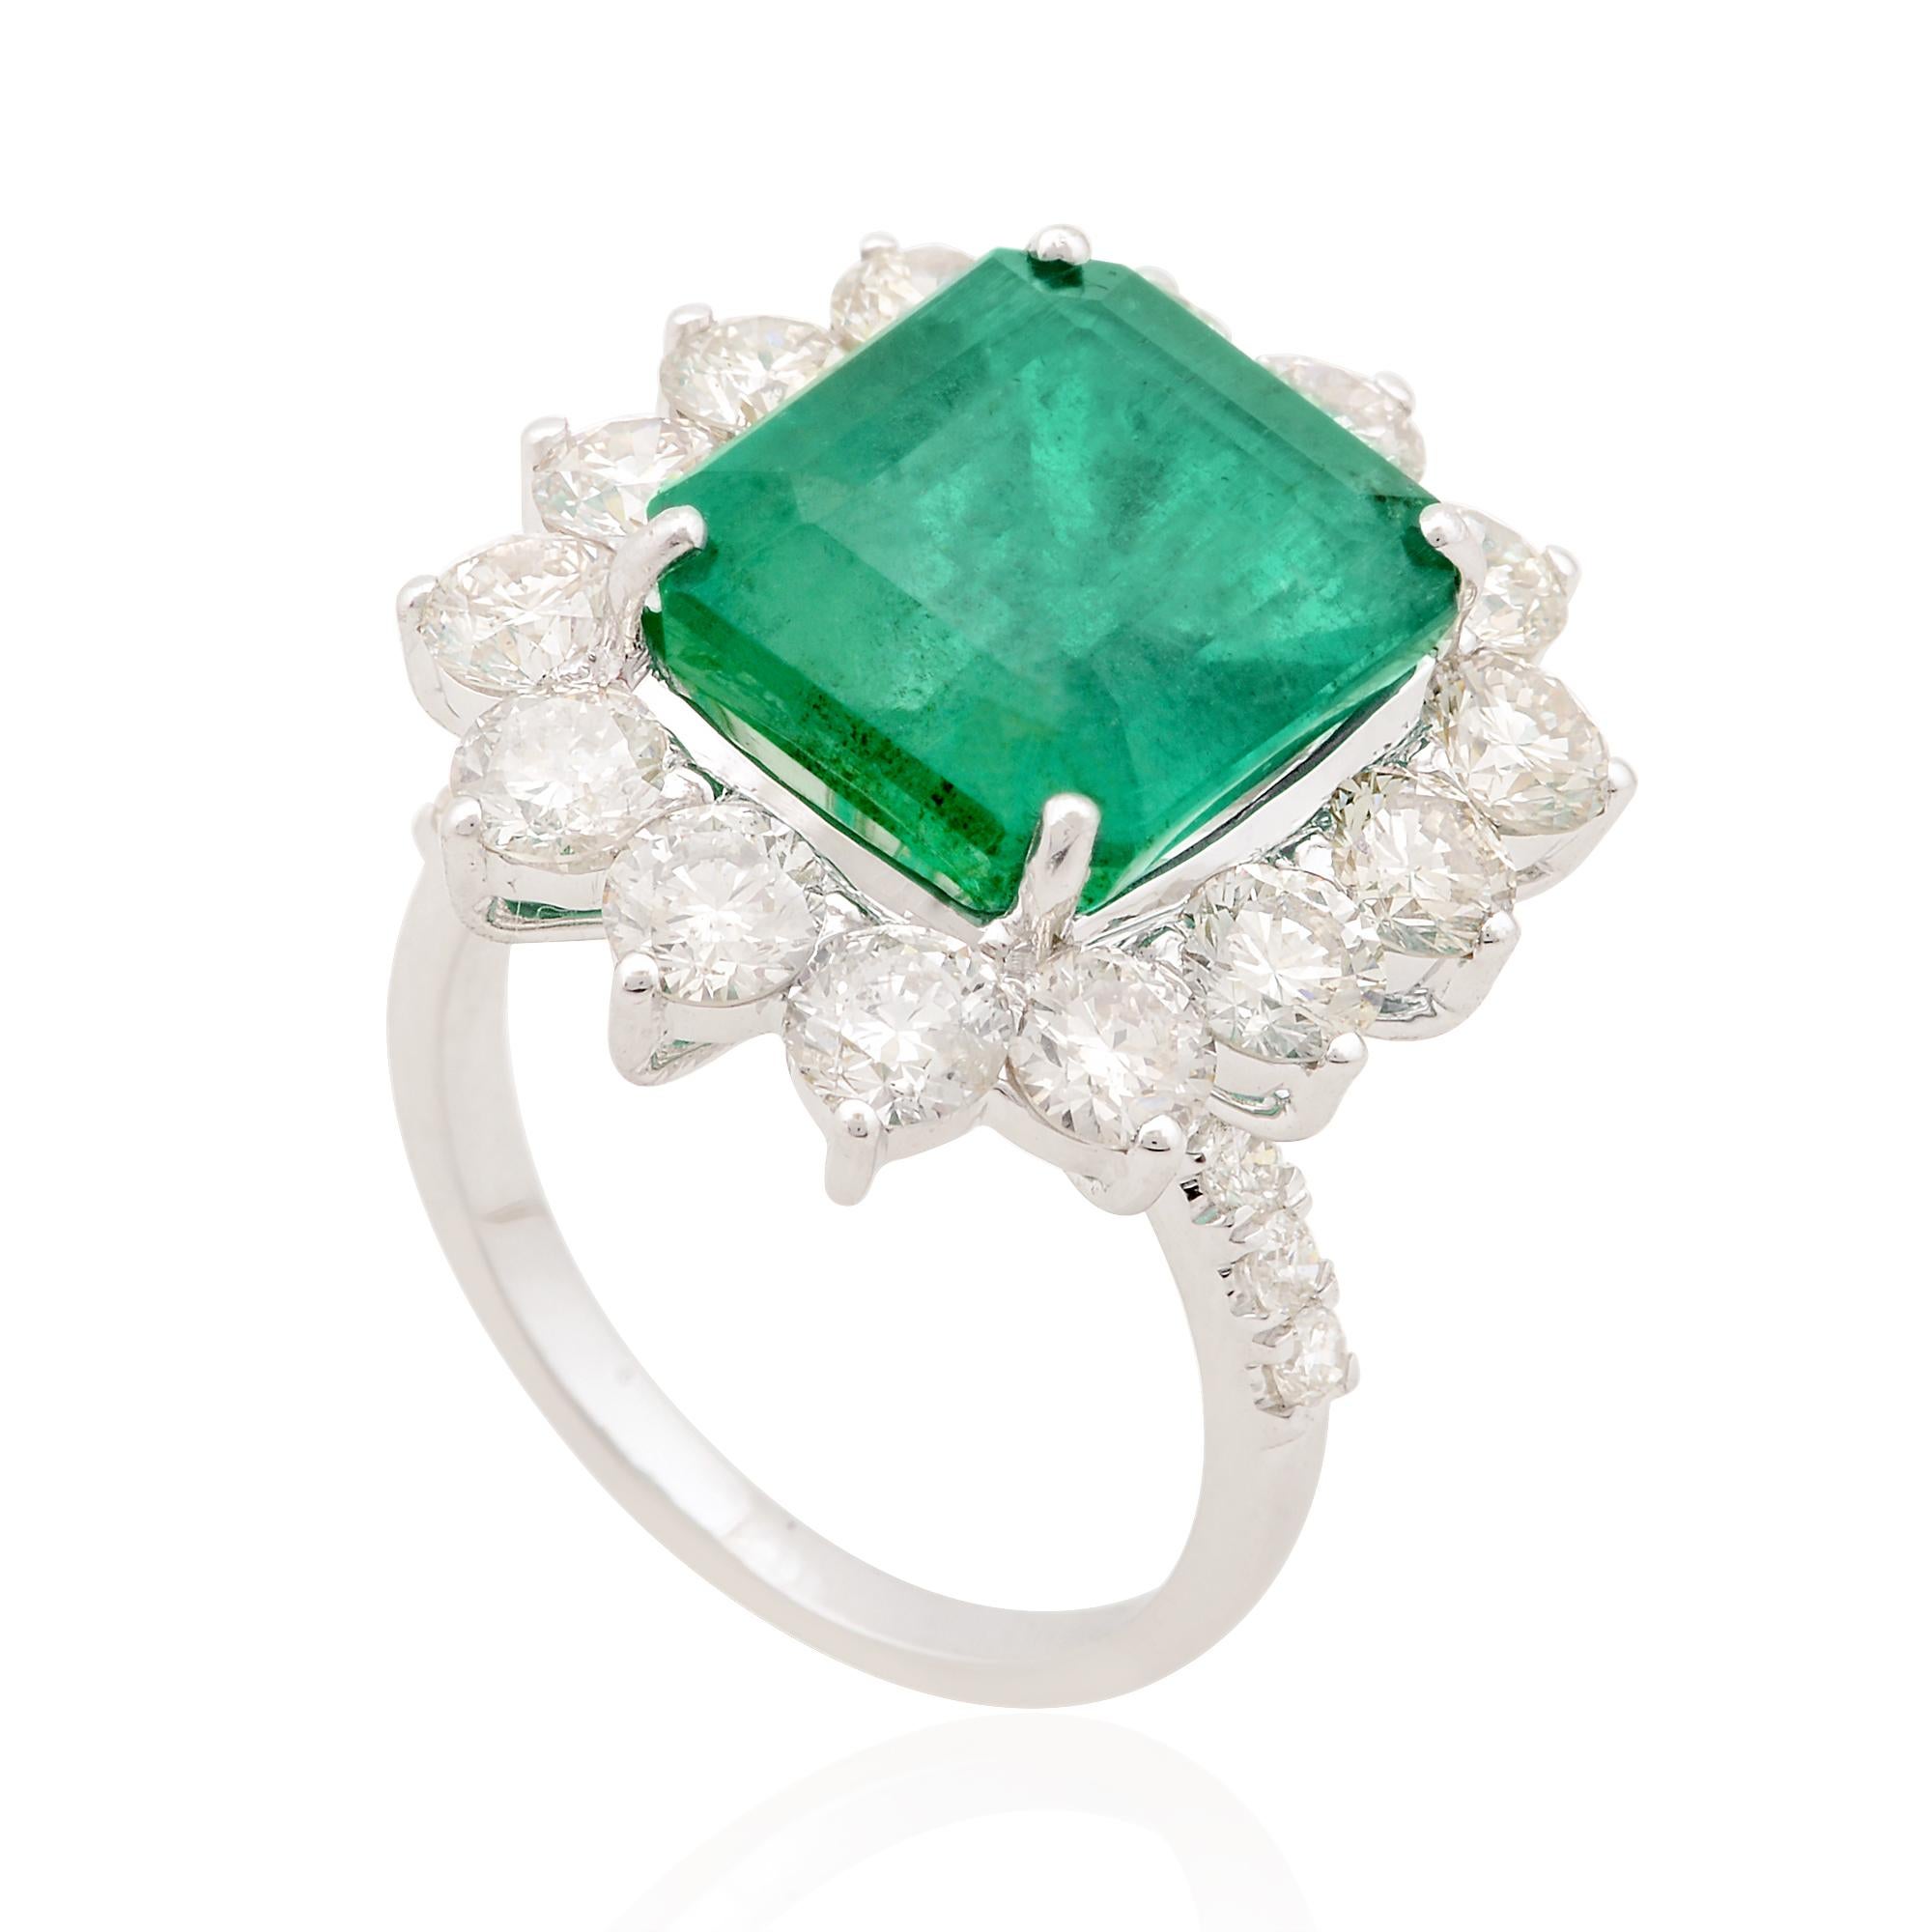 For Sale:  Natural Emerald Gemstone Cocktail Ring Diamond Solid 18k White Gold Fine Jewelry 4